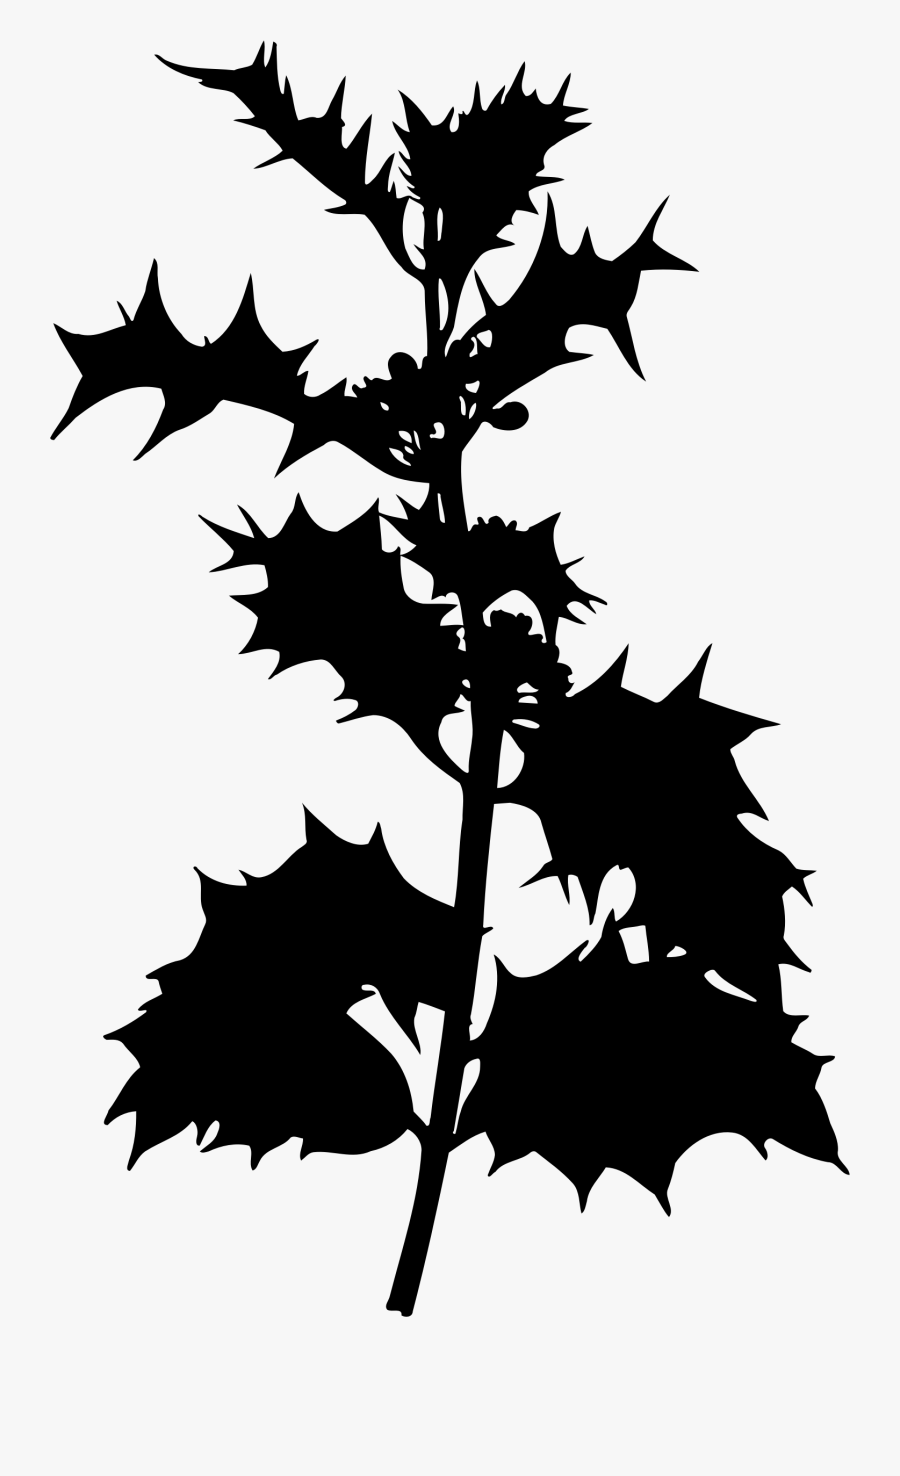 Holly 2 Clip Arts - Holly Bush Silhouette Png, Transparent Clipart